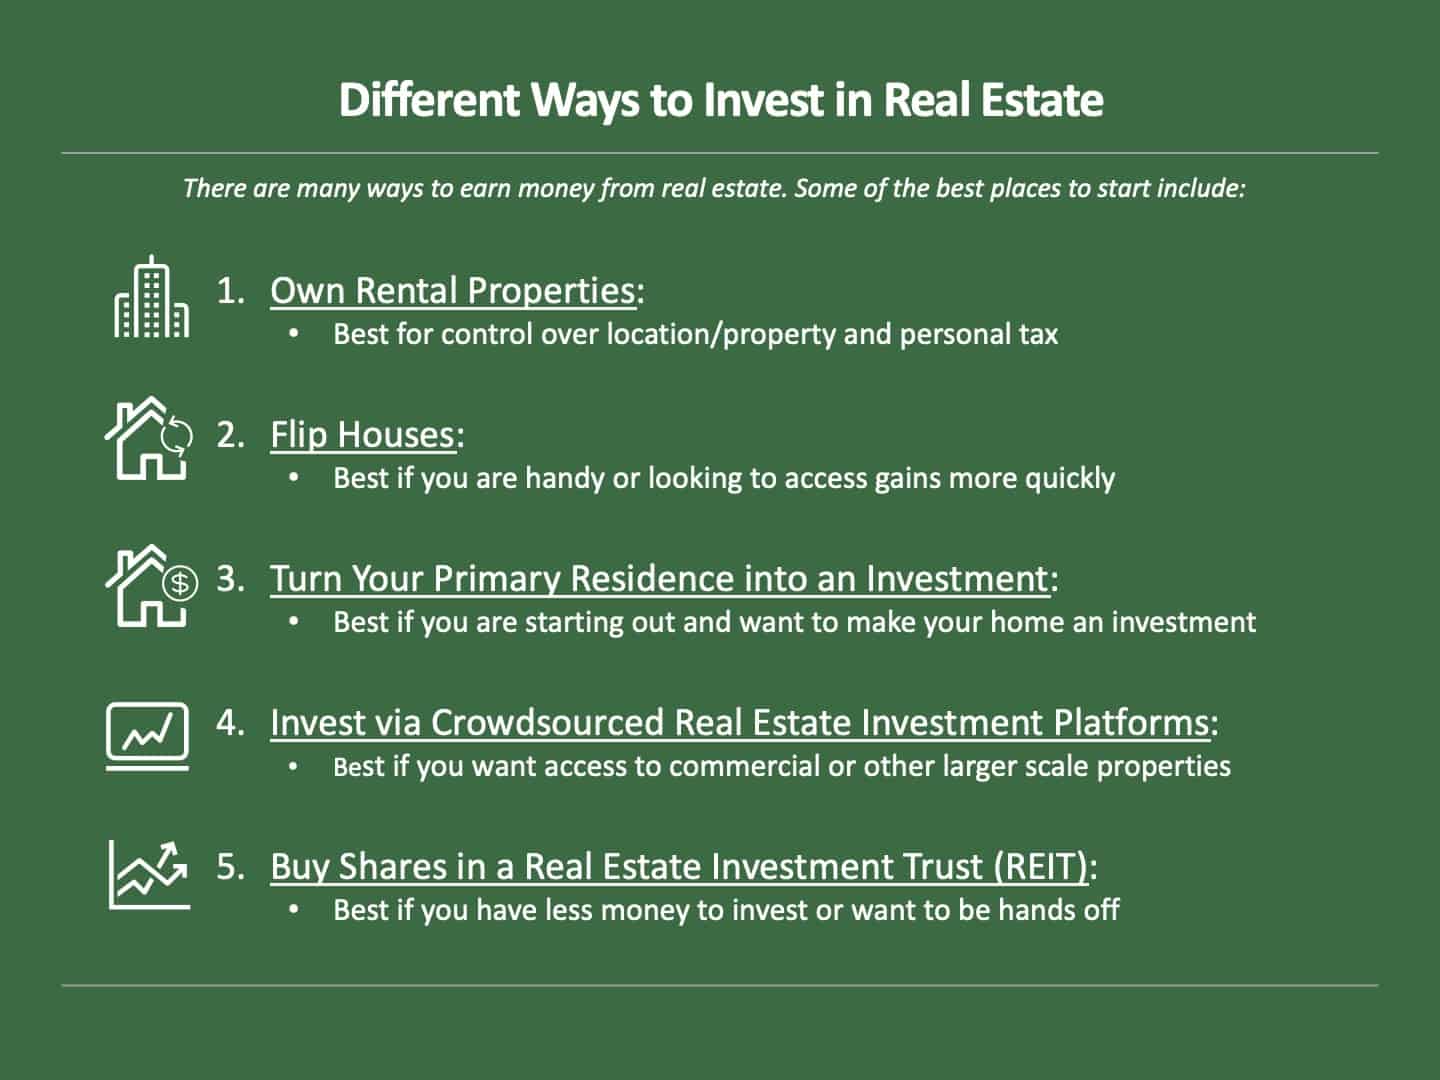 How to Invest in Real Estate Stepwise